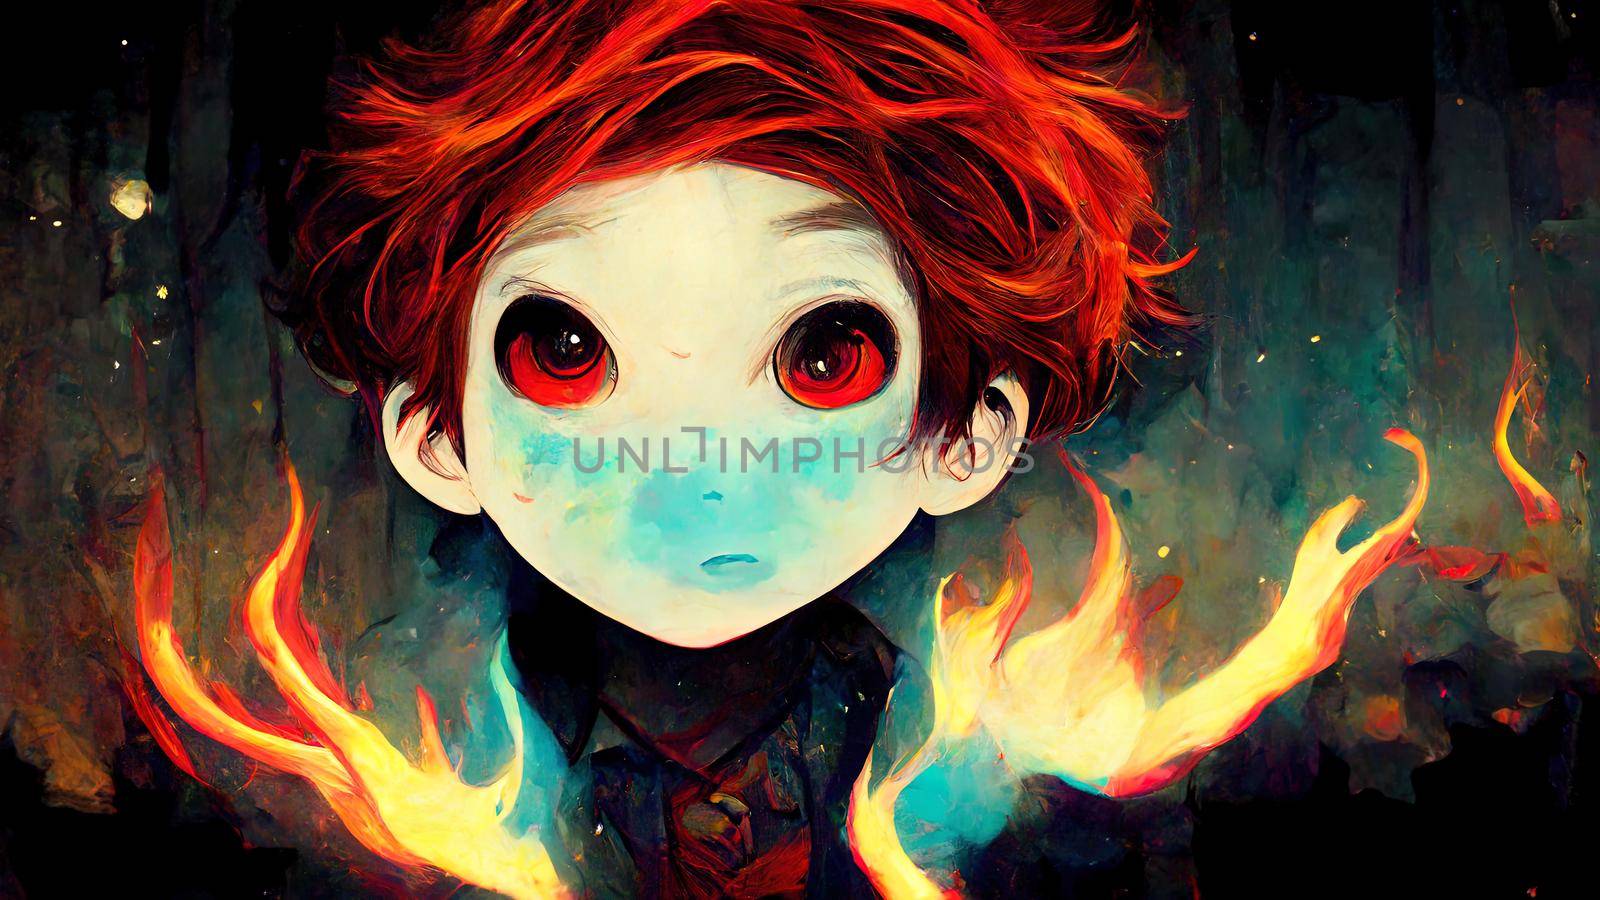 Beautiful anime boy character ,flames in hand by 2ragon